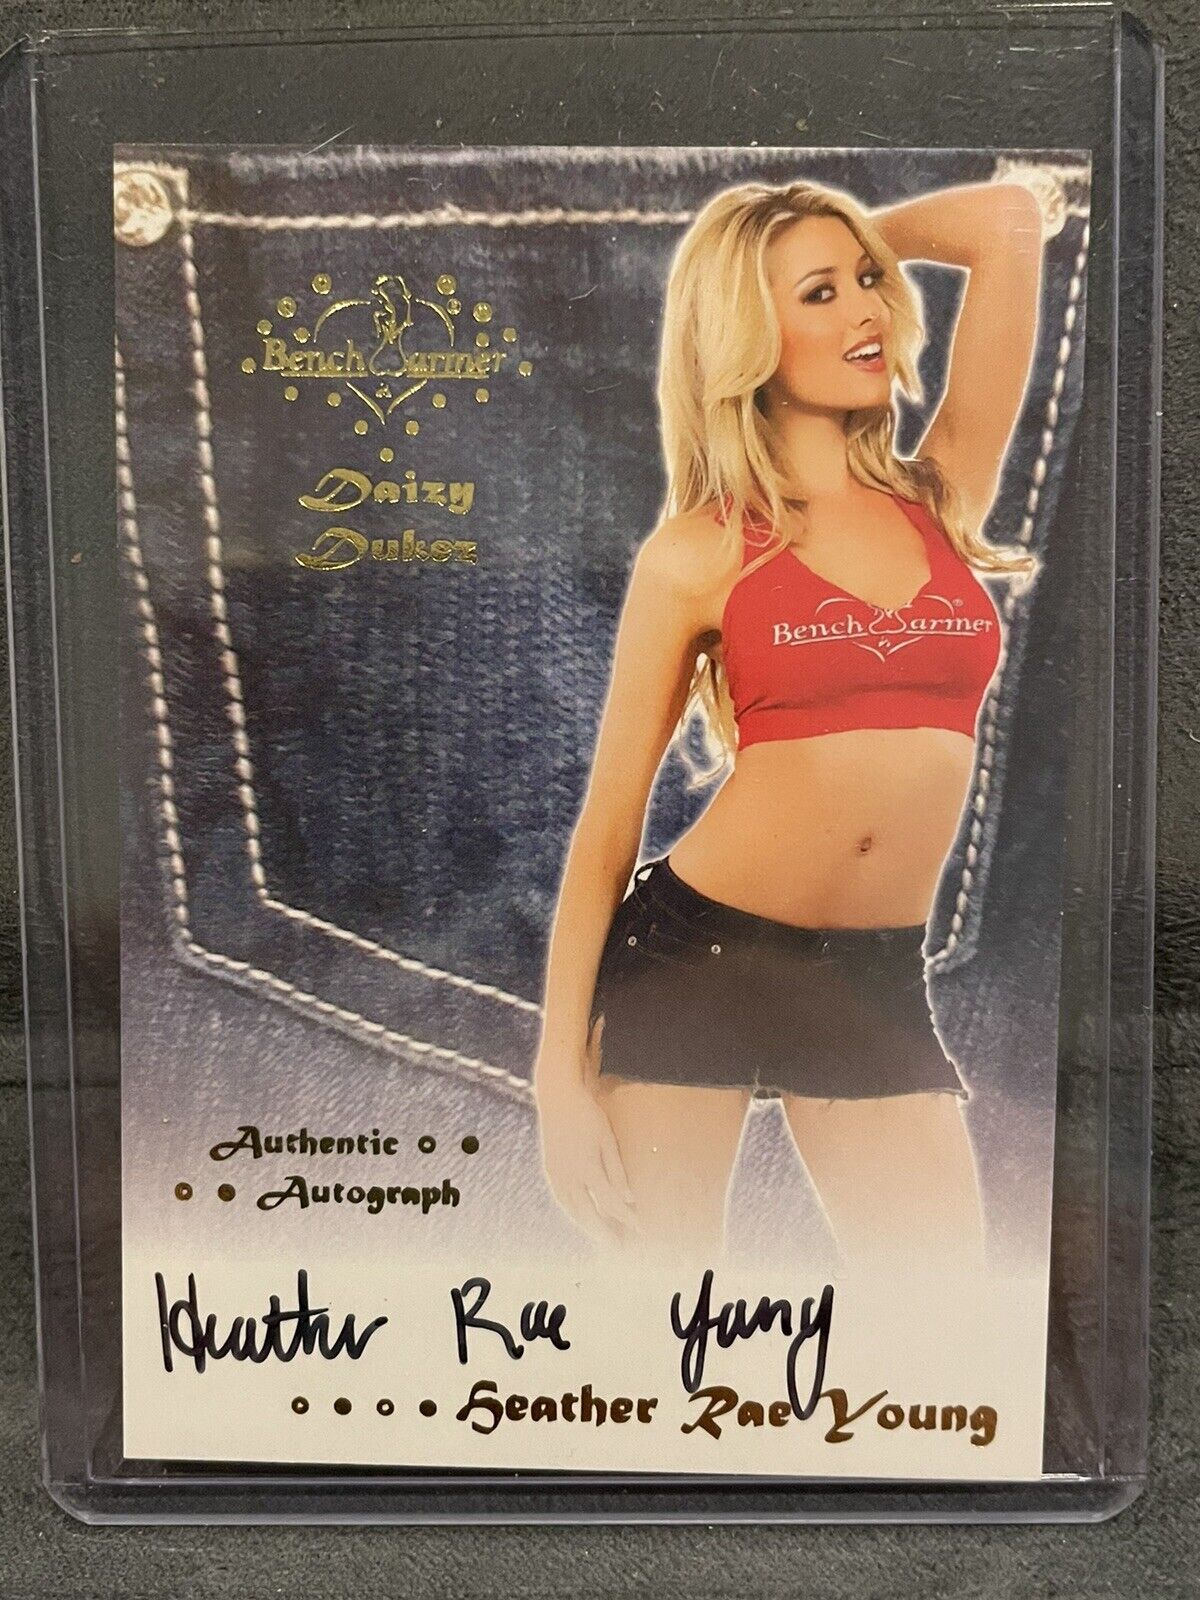 BenchWarmer 2012 Daizy Dukez Heather Rae Young Authentic Autograph Insert #21